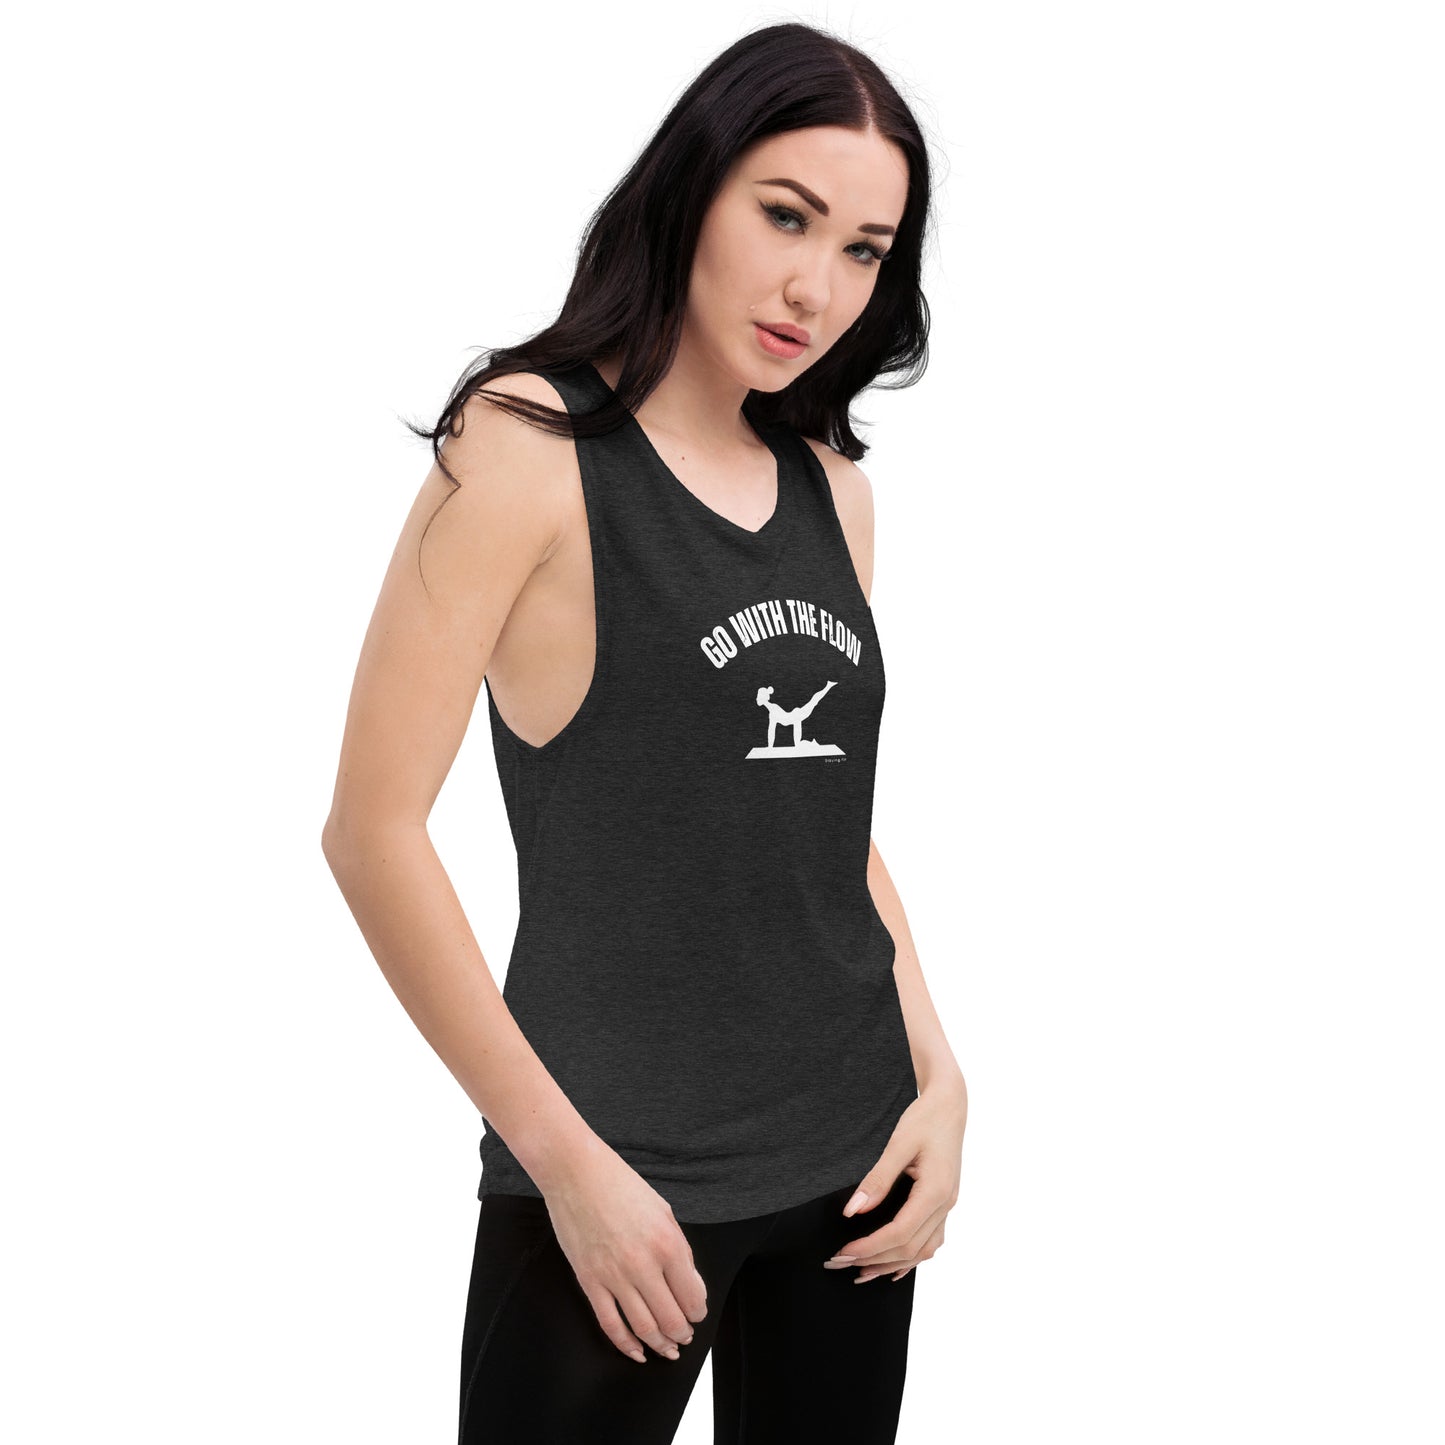 Go with the Flow Ladies’ Muscle Tank